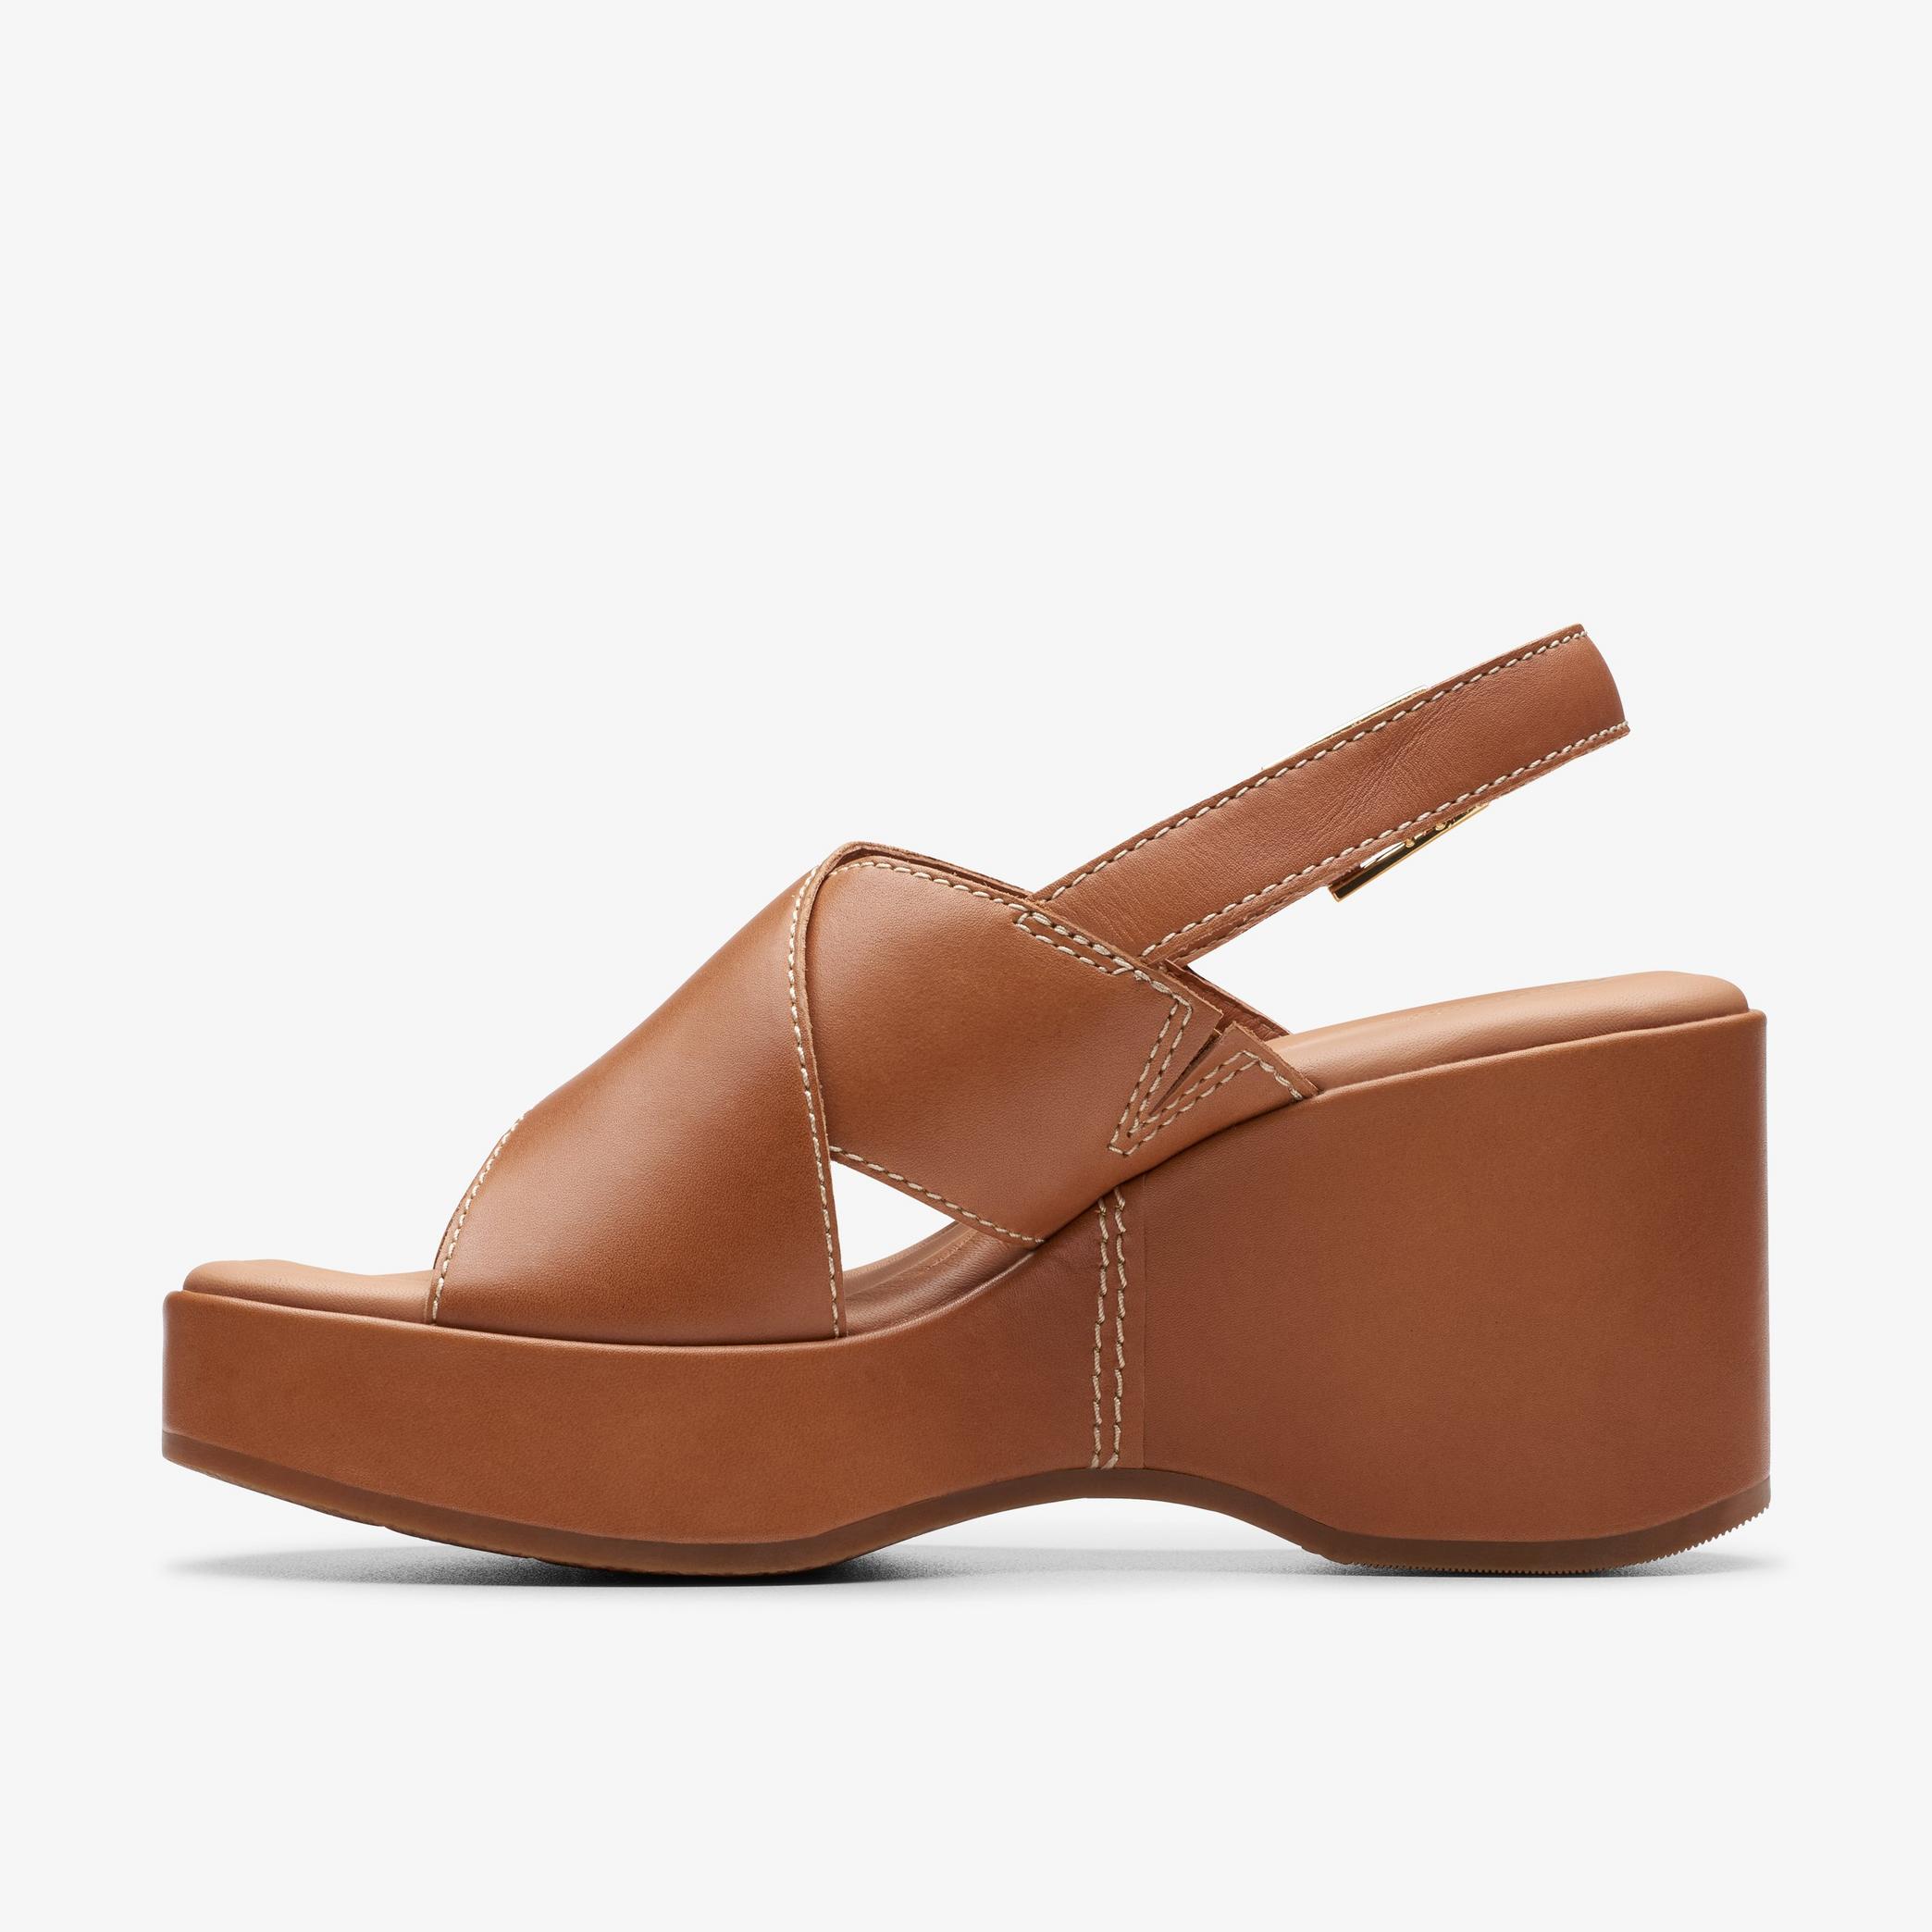 Manon Wish Tan Leather Heeled Sandals, view 2 of 6